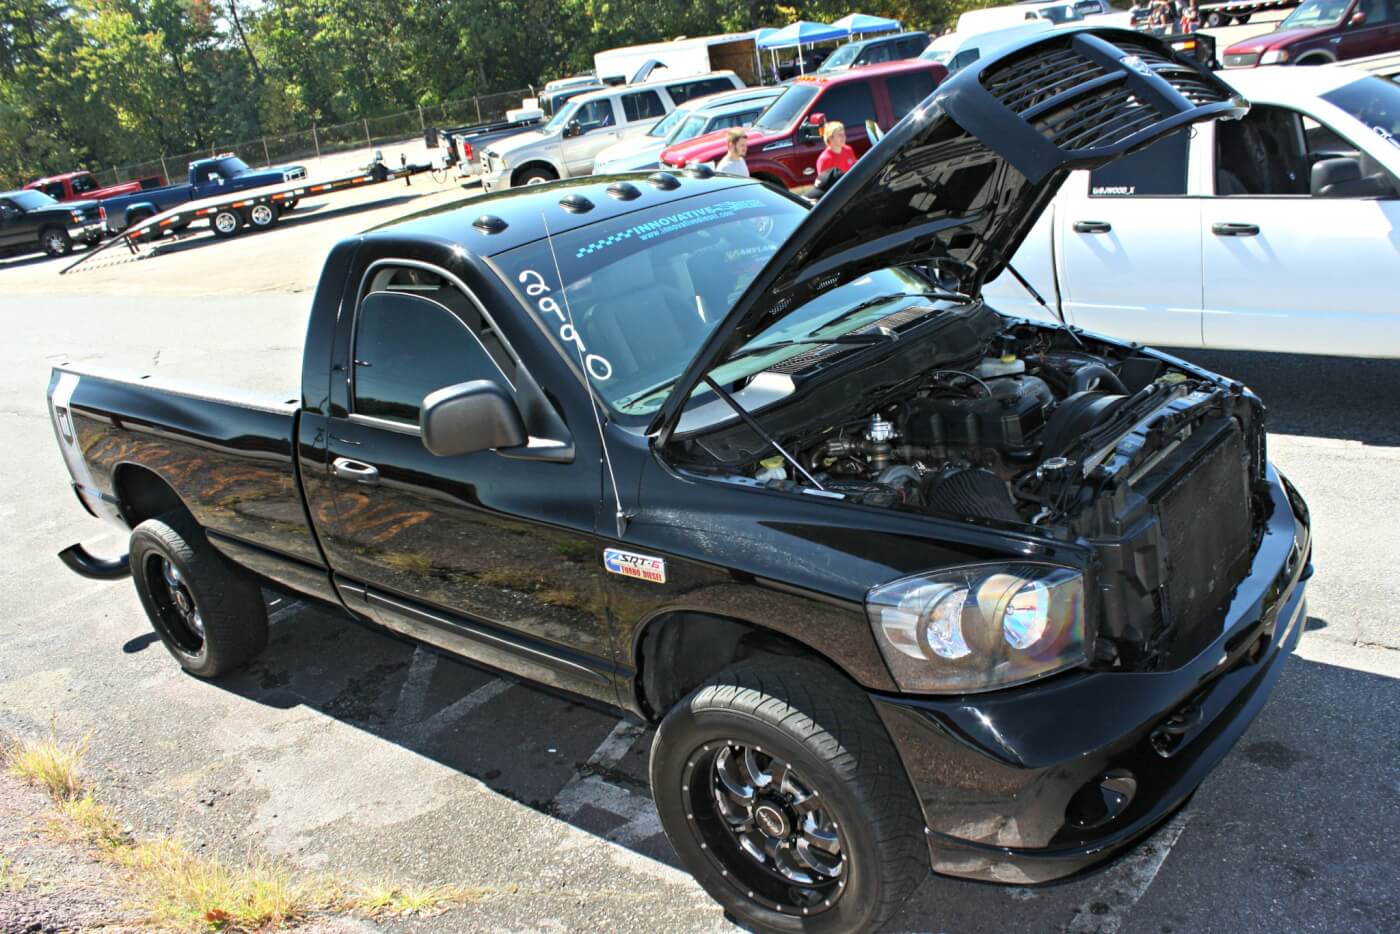 Innovative Diesel owner Eric Eldreth has always specialized in custom Ford tuning, but jumped into the Cummins game a few years back. This black regular cab long bed became a testing platform for his new tuning. Running a single S467 BorgWarner, some big injectors and a single-stage nitrous system, the 5.9L common rail pushes the envelope, knocking on the nine-second 1/4-mile club’s door.